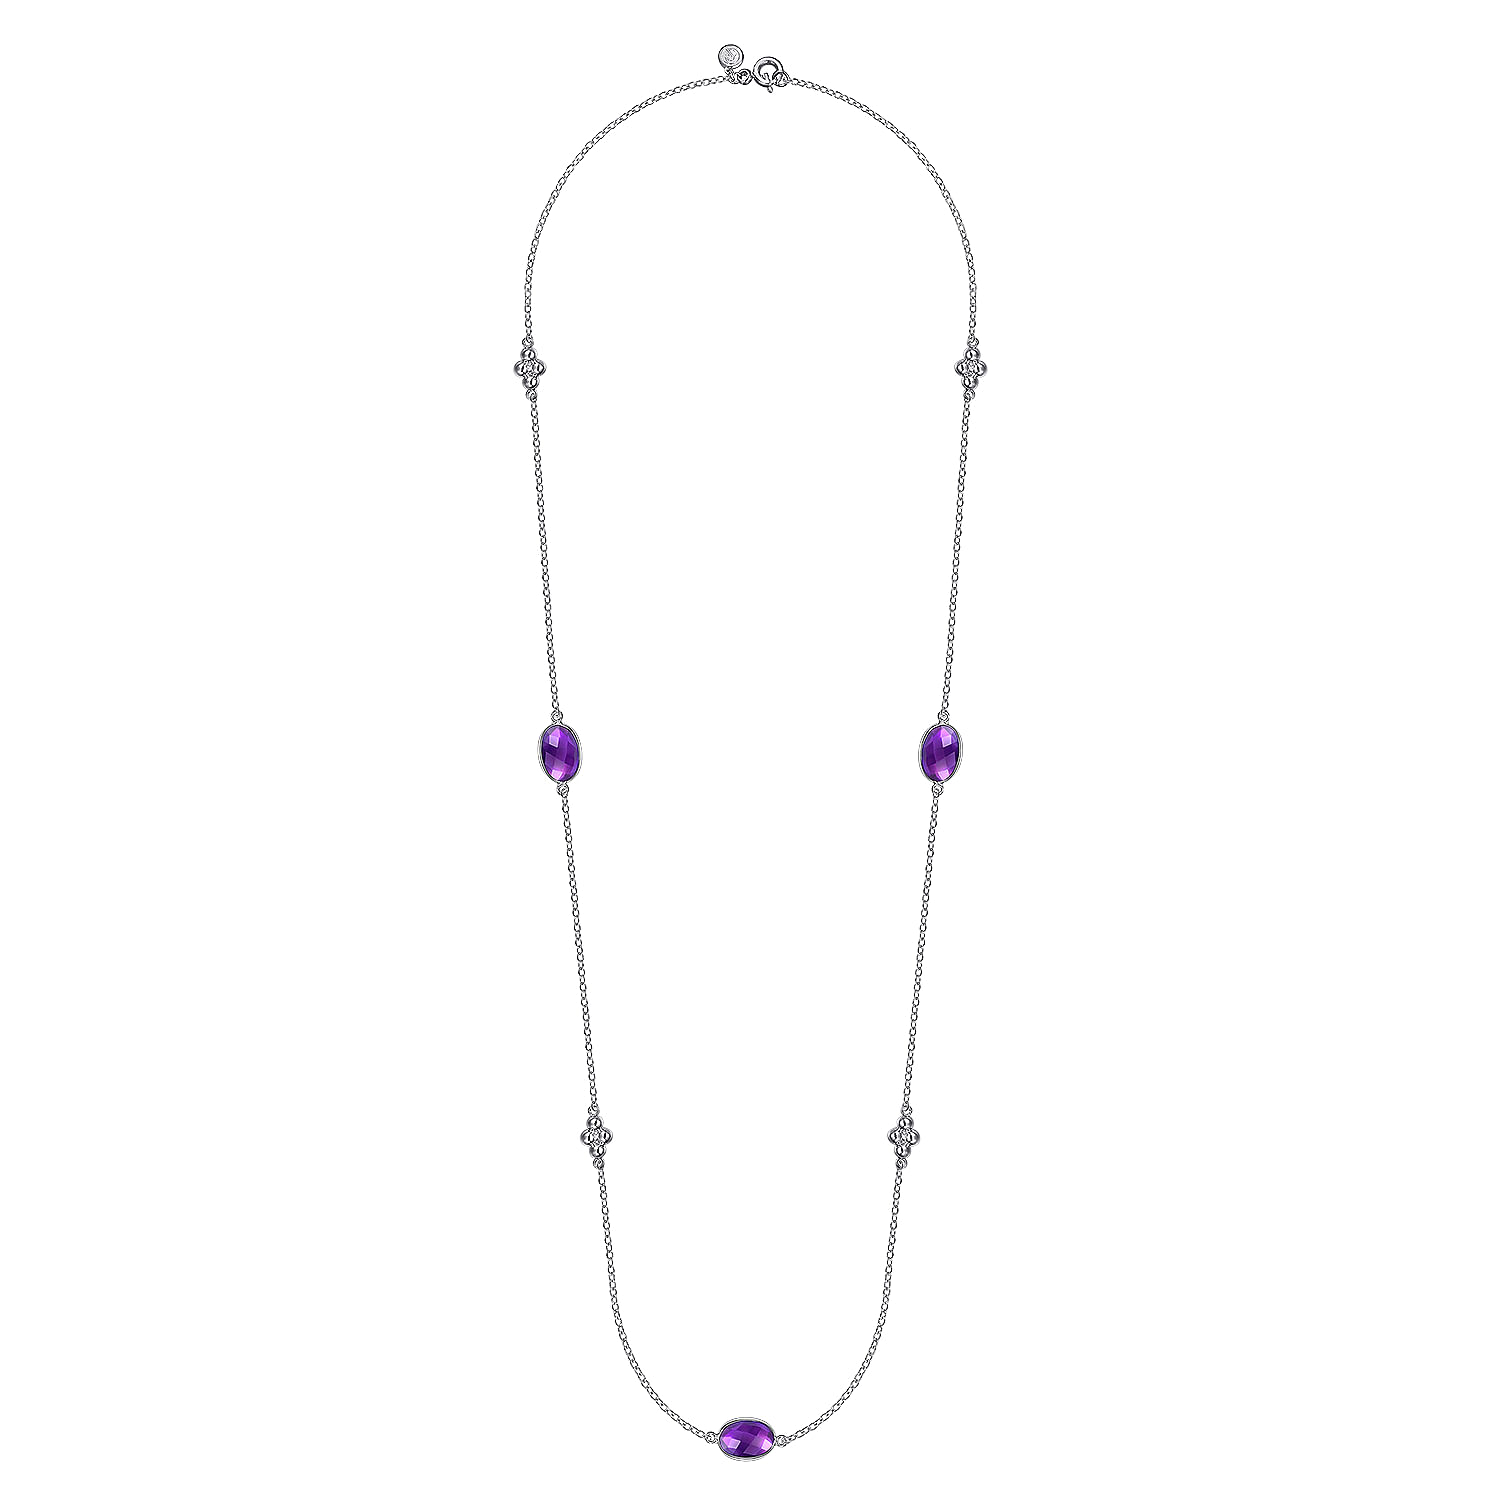 925 Sterling Silver 32 inch Bezel Oval Amethyst and Bujukan Beads Station Necklace